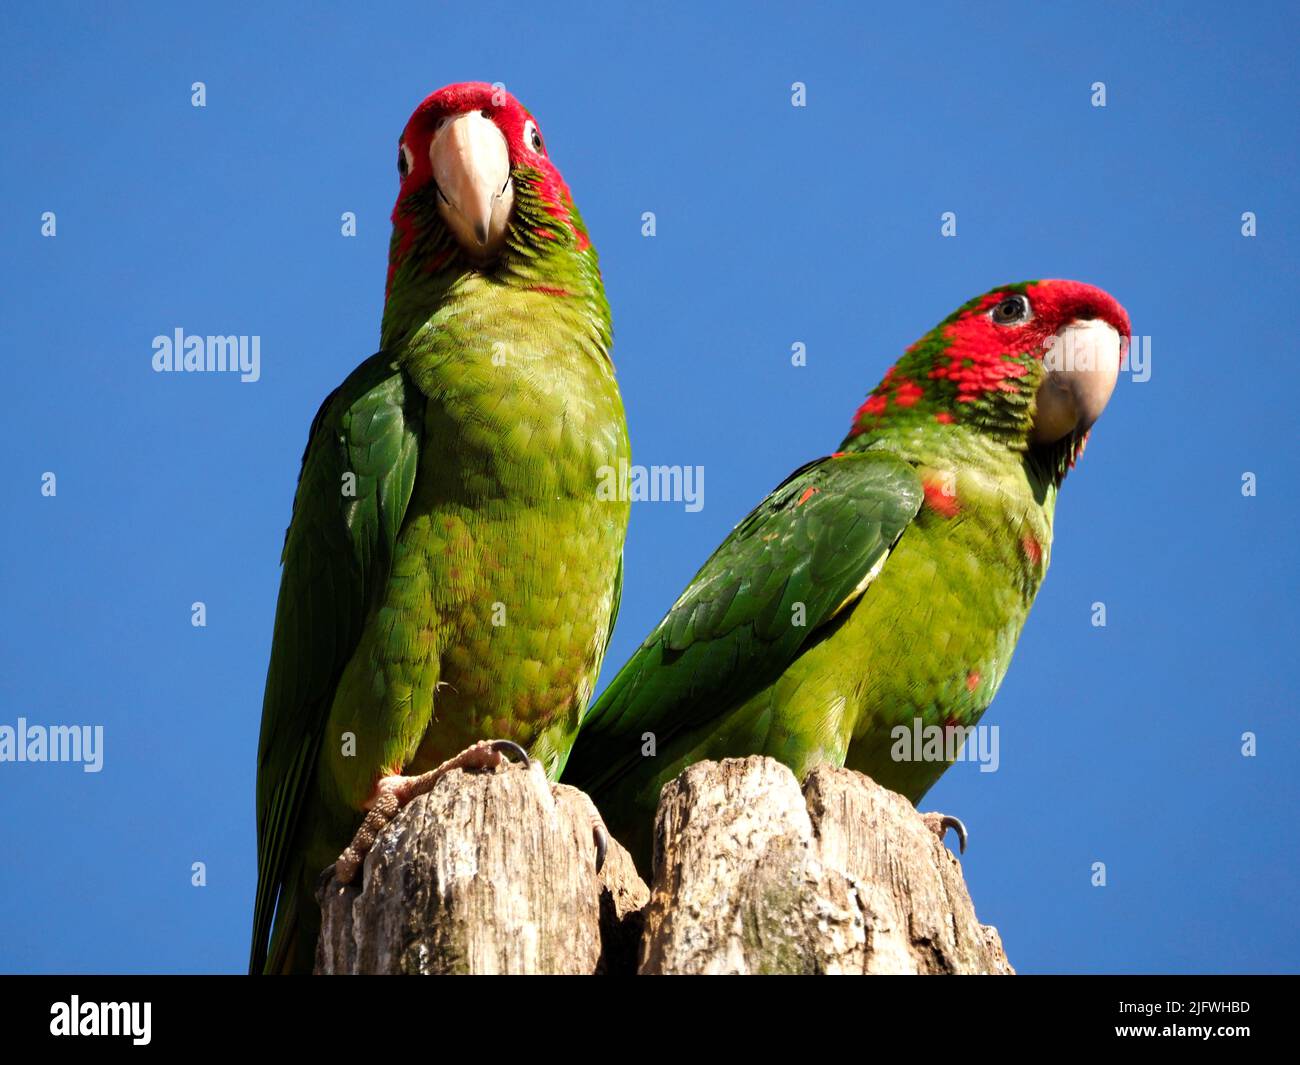 Two Mitred Parakeets, Psittacara mitratus or Aratinga mitrata, perched on wood post on blue sky background Stock Photo